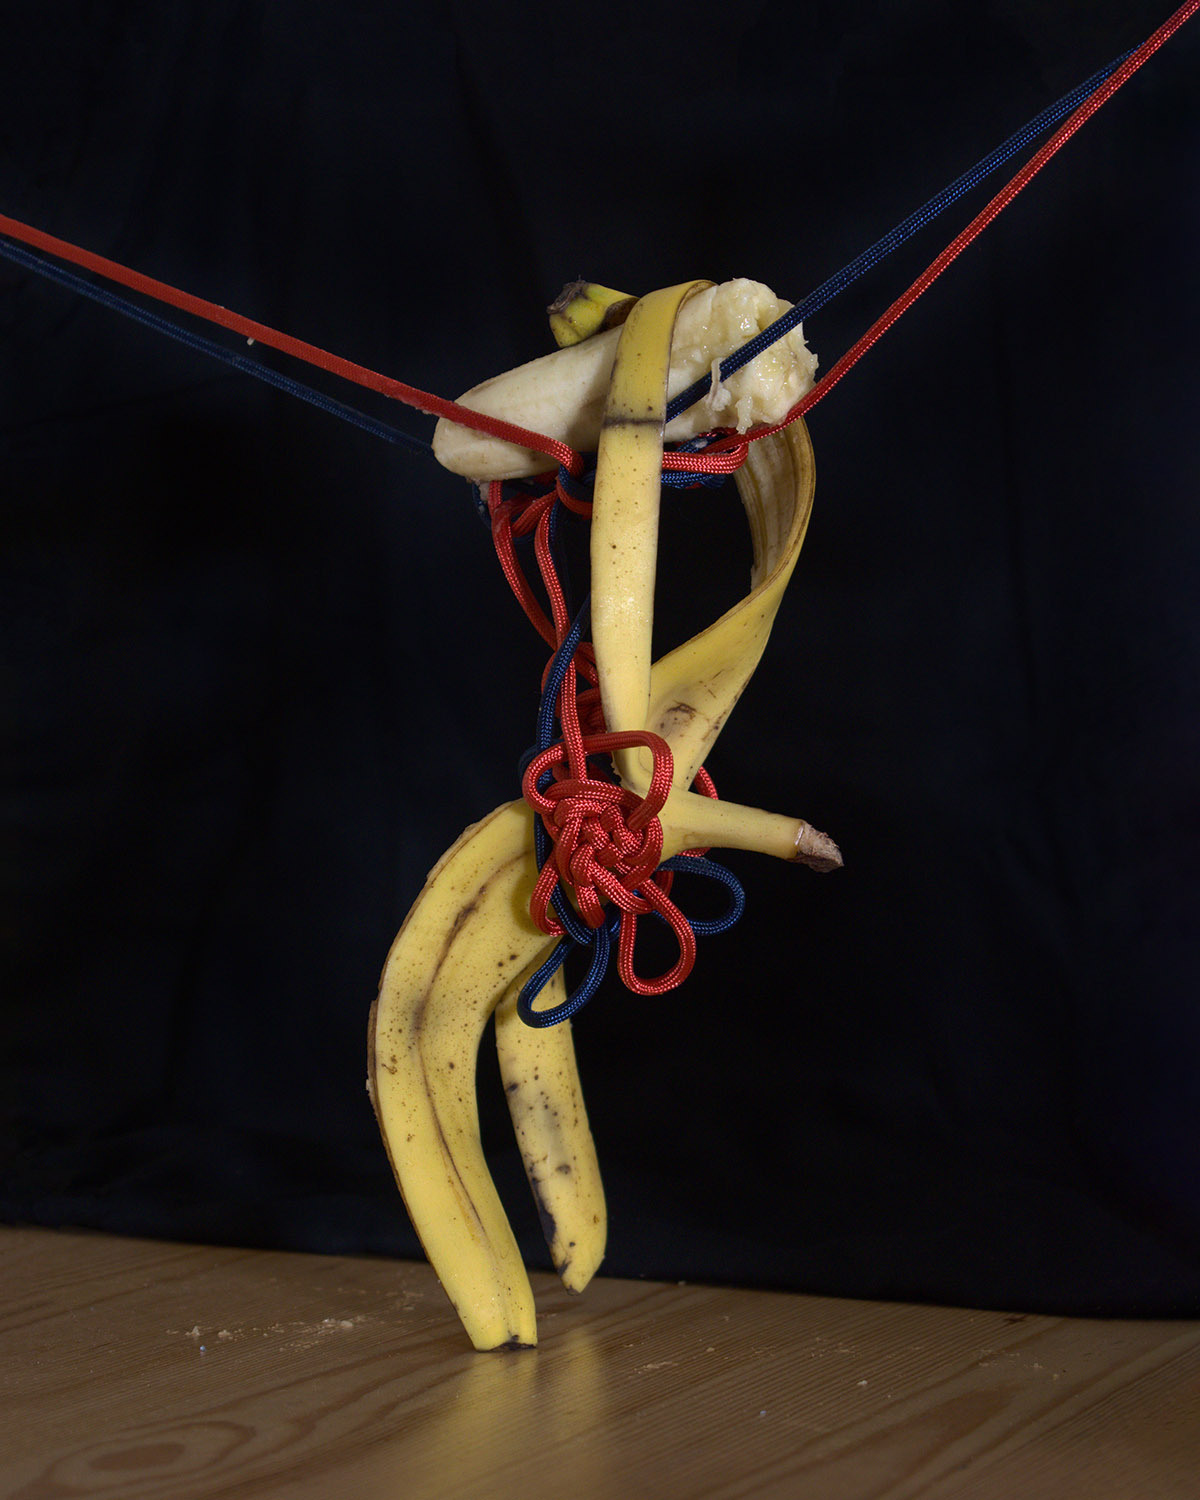 An anthropomorphic banana skin separated from banana flesh and hanging from one broken half of the banana flesh with legs touching a table. The banana flesh is suspended from knotted red and blue rope, in front of a black background.